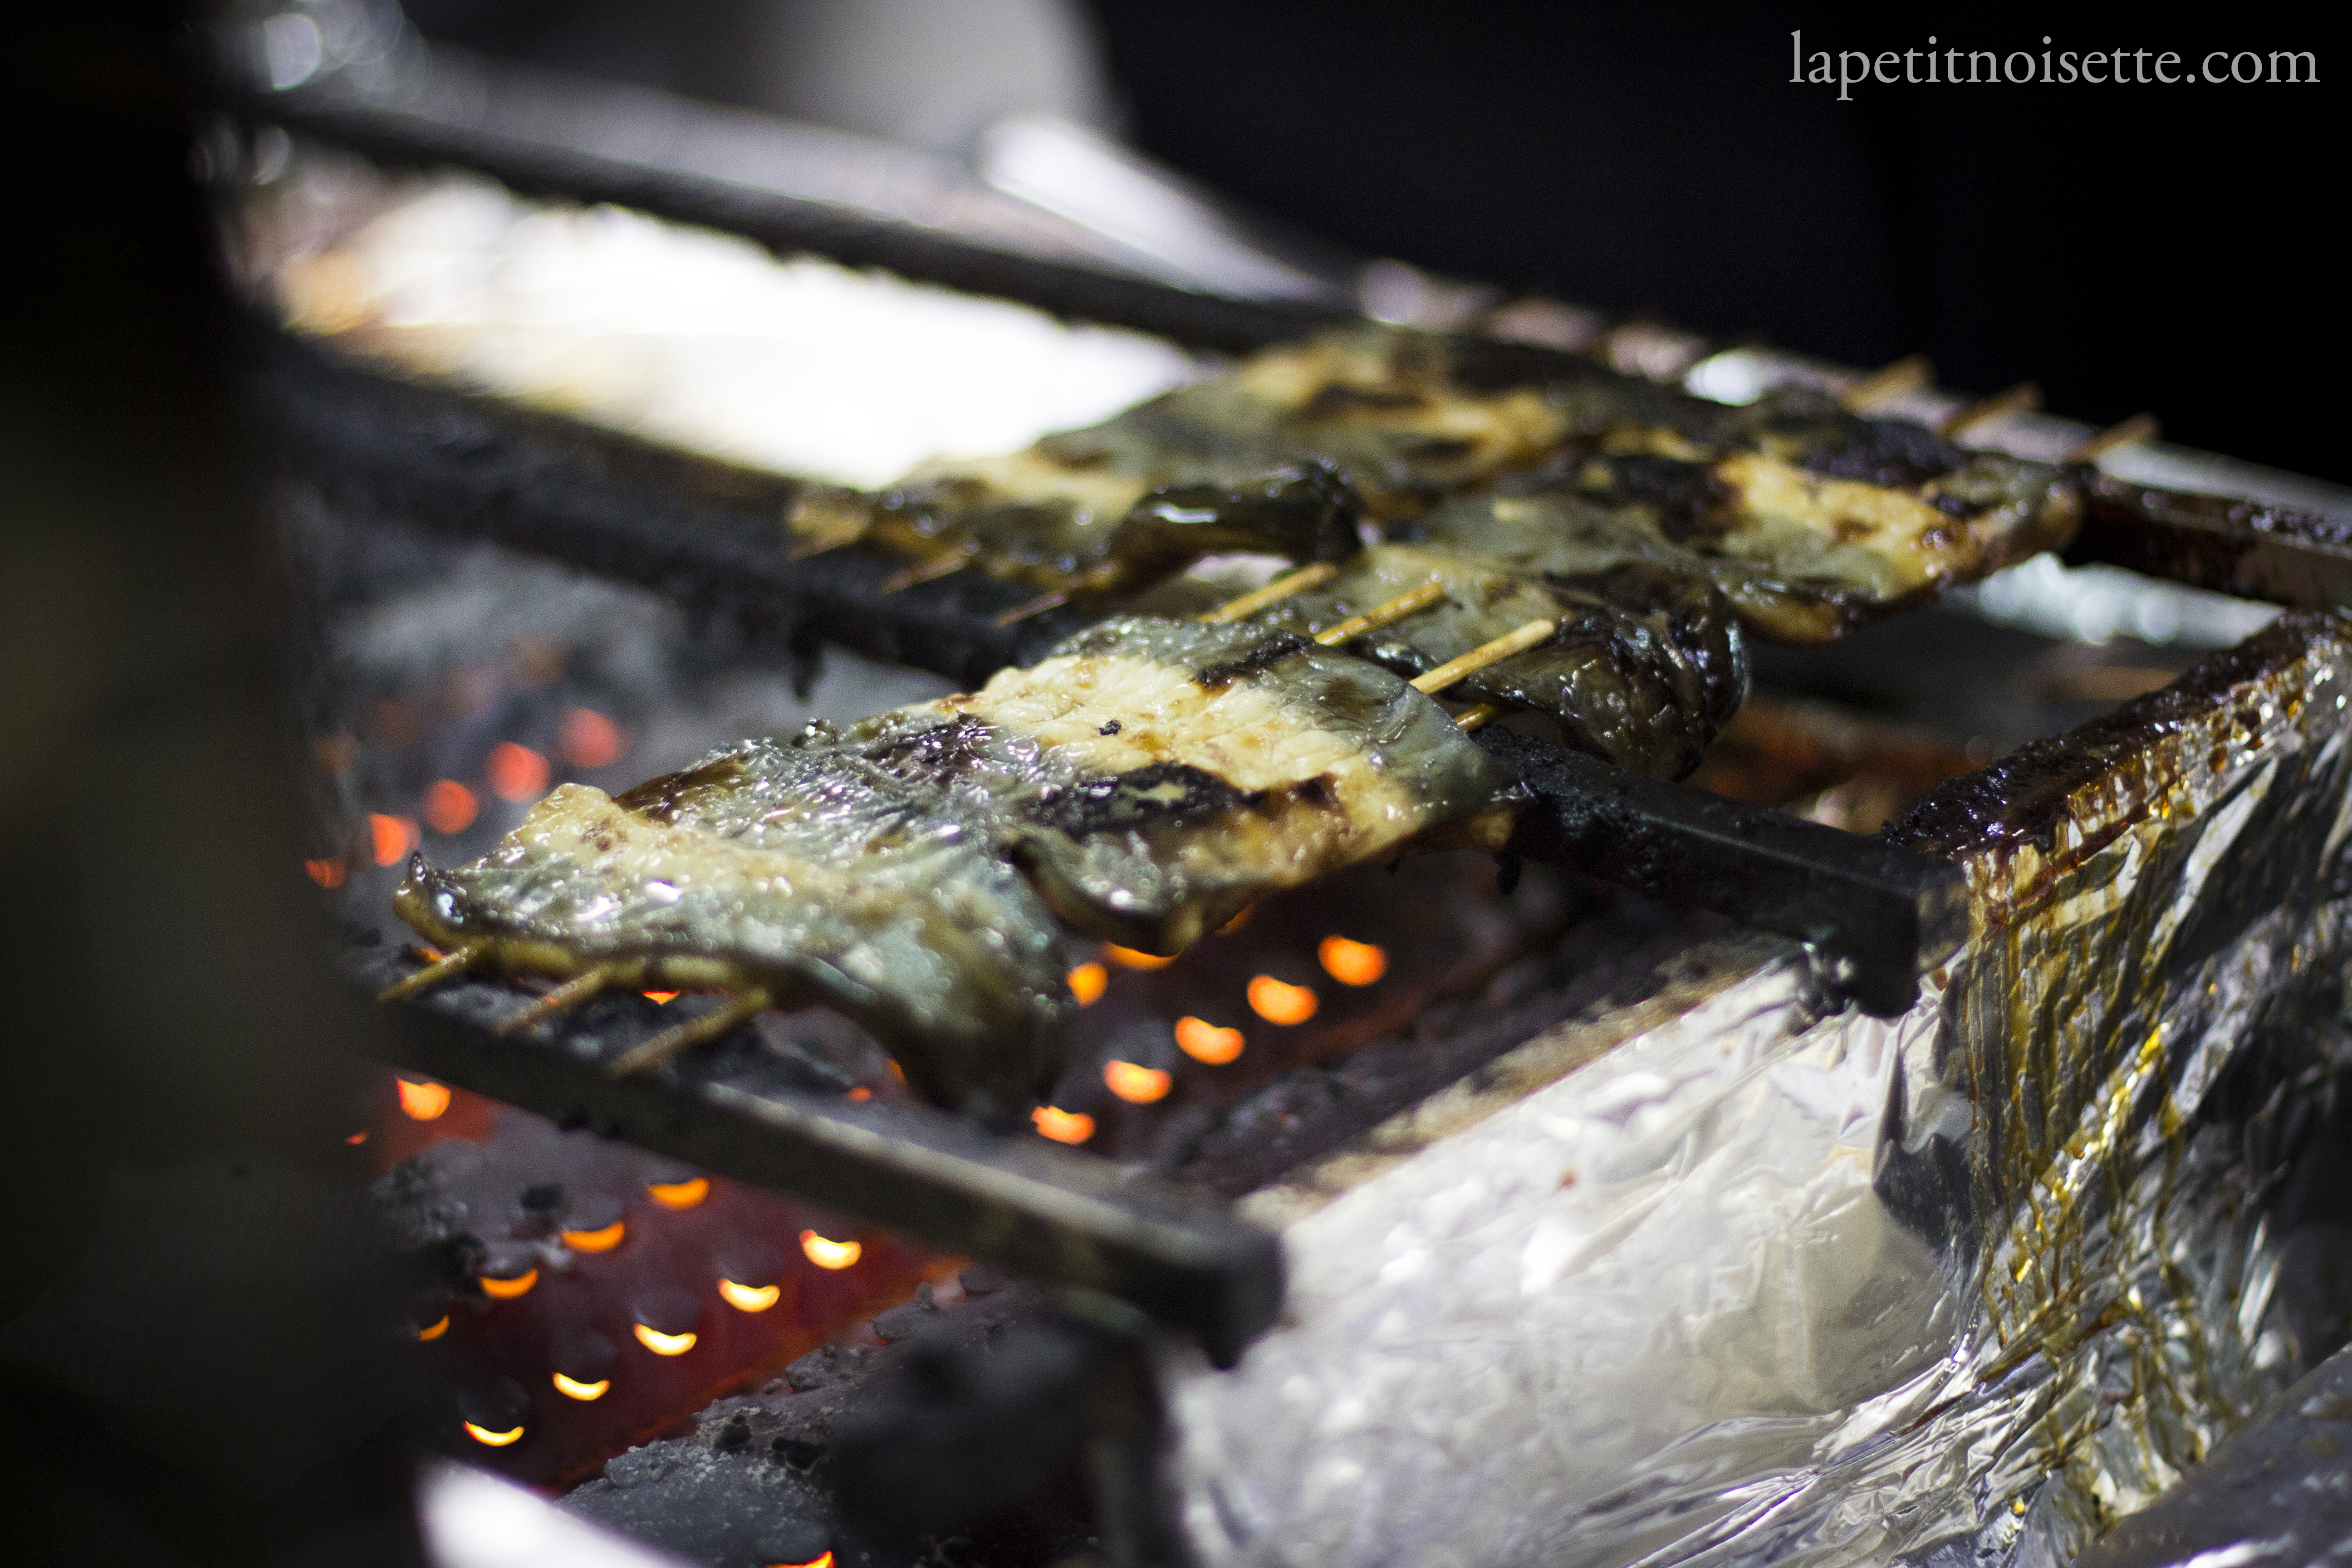 Skewers of eels being grilled over hot charcoal.